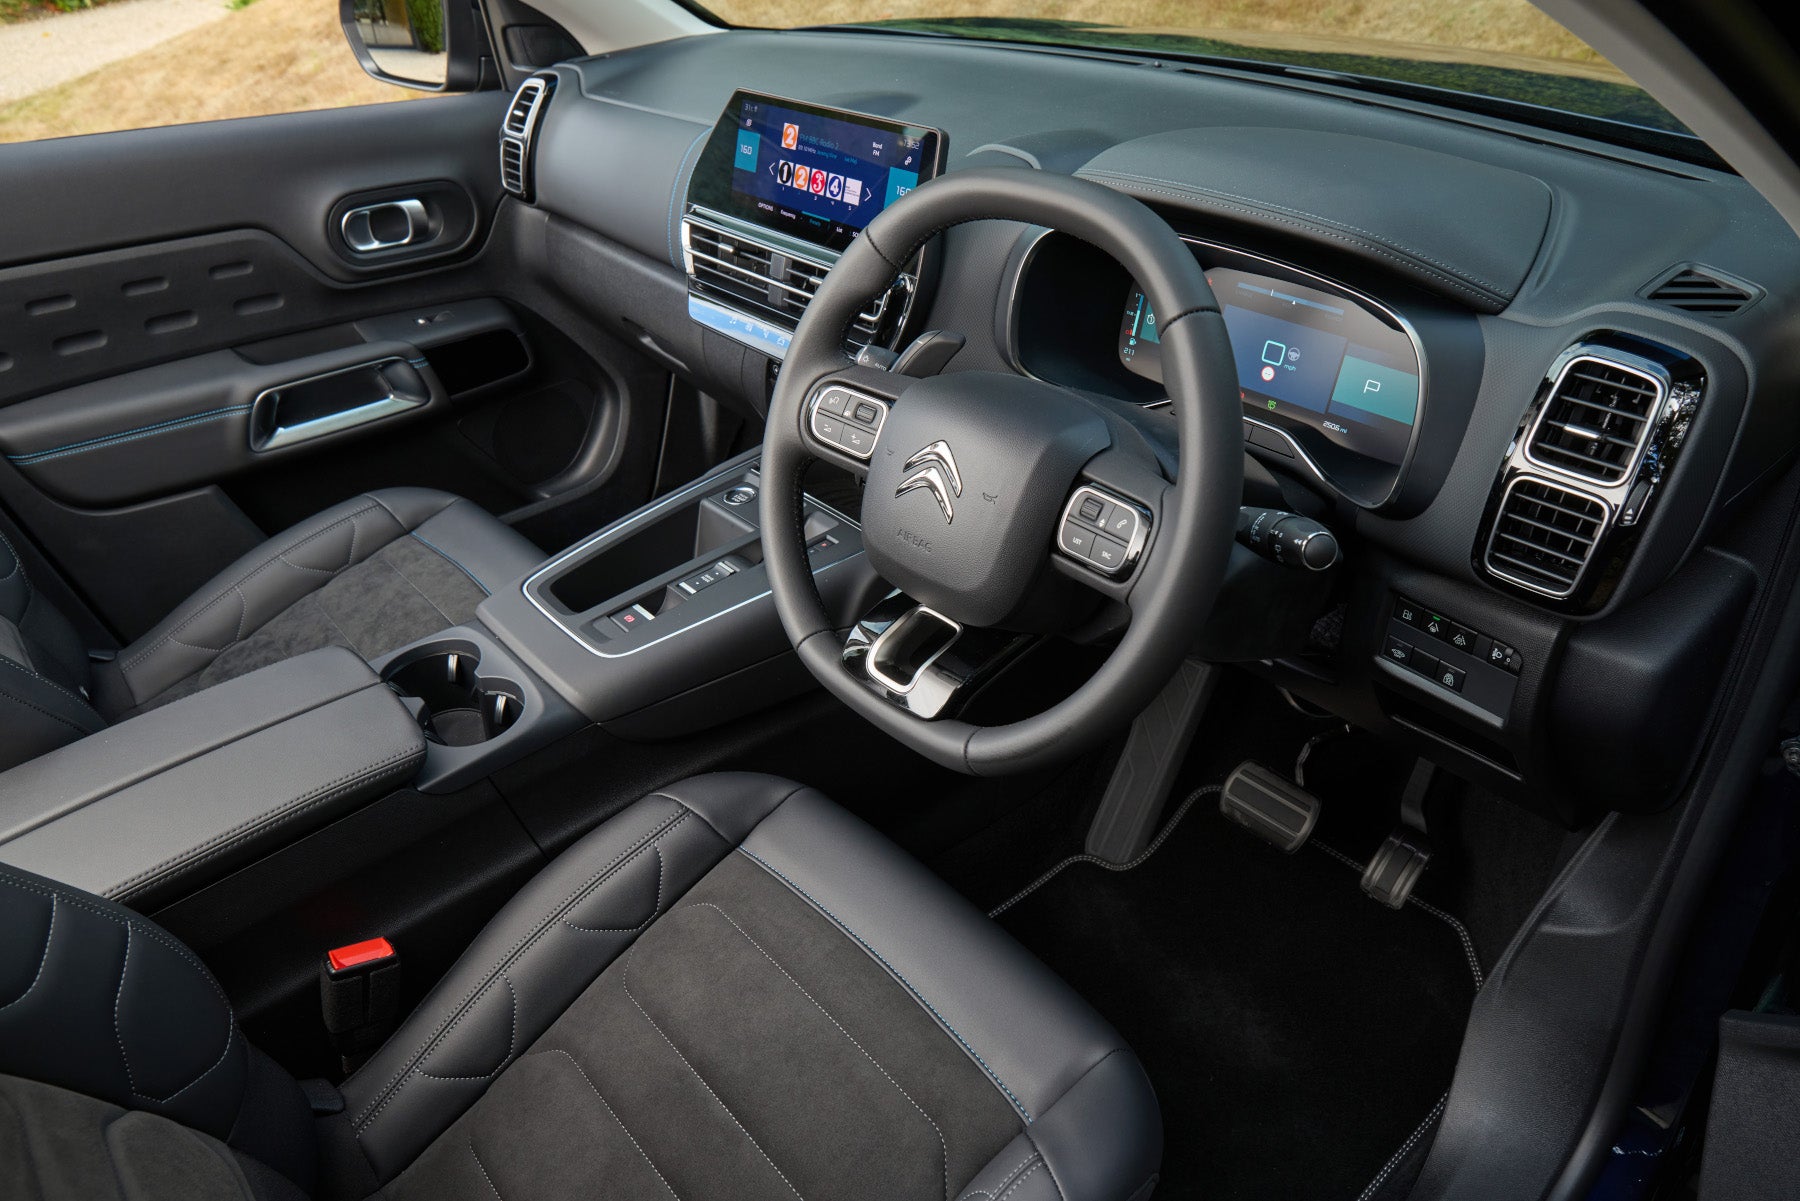 Citroen C5 Aircross Images - Interior & Exterior Photo Gallery [250+  Images] - CarWale